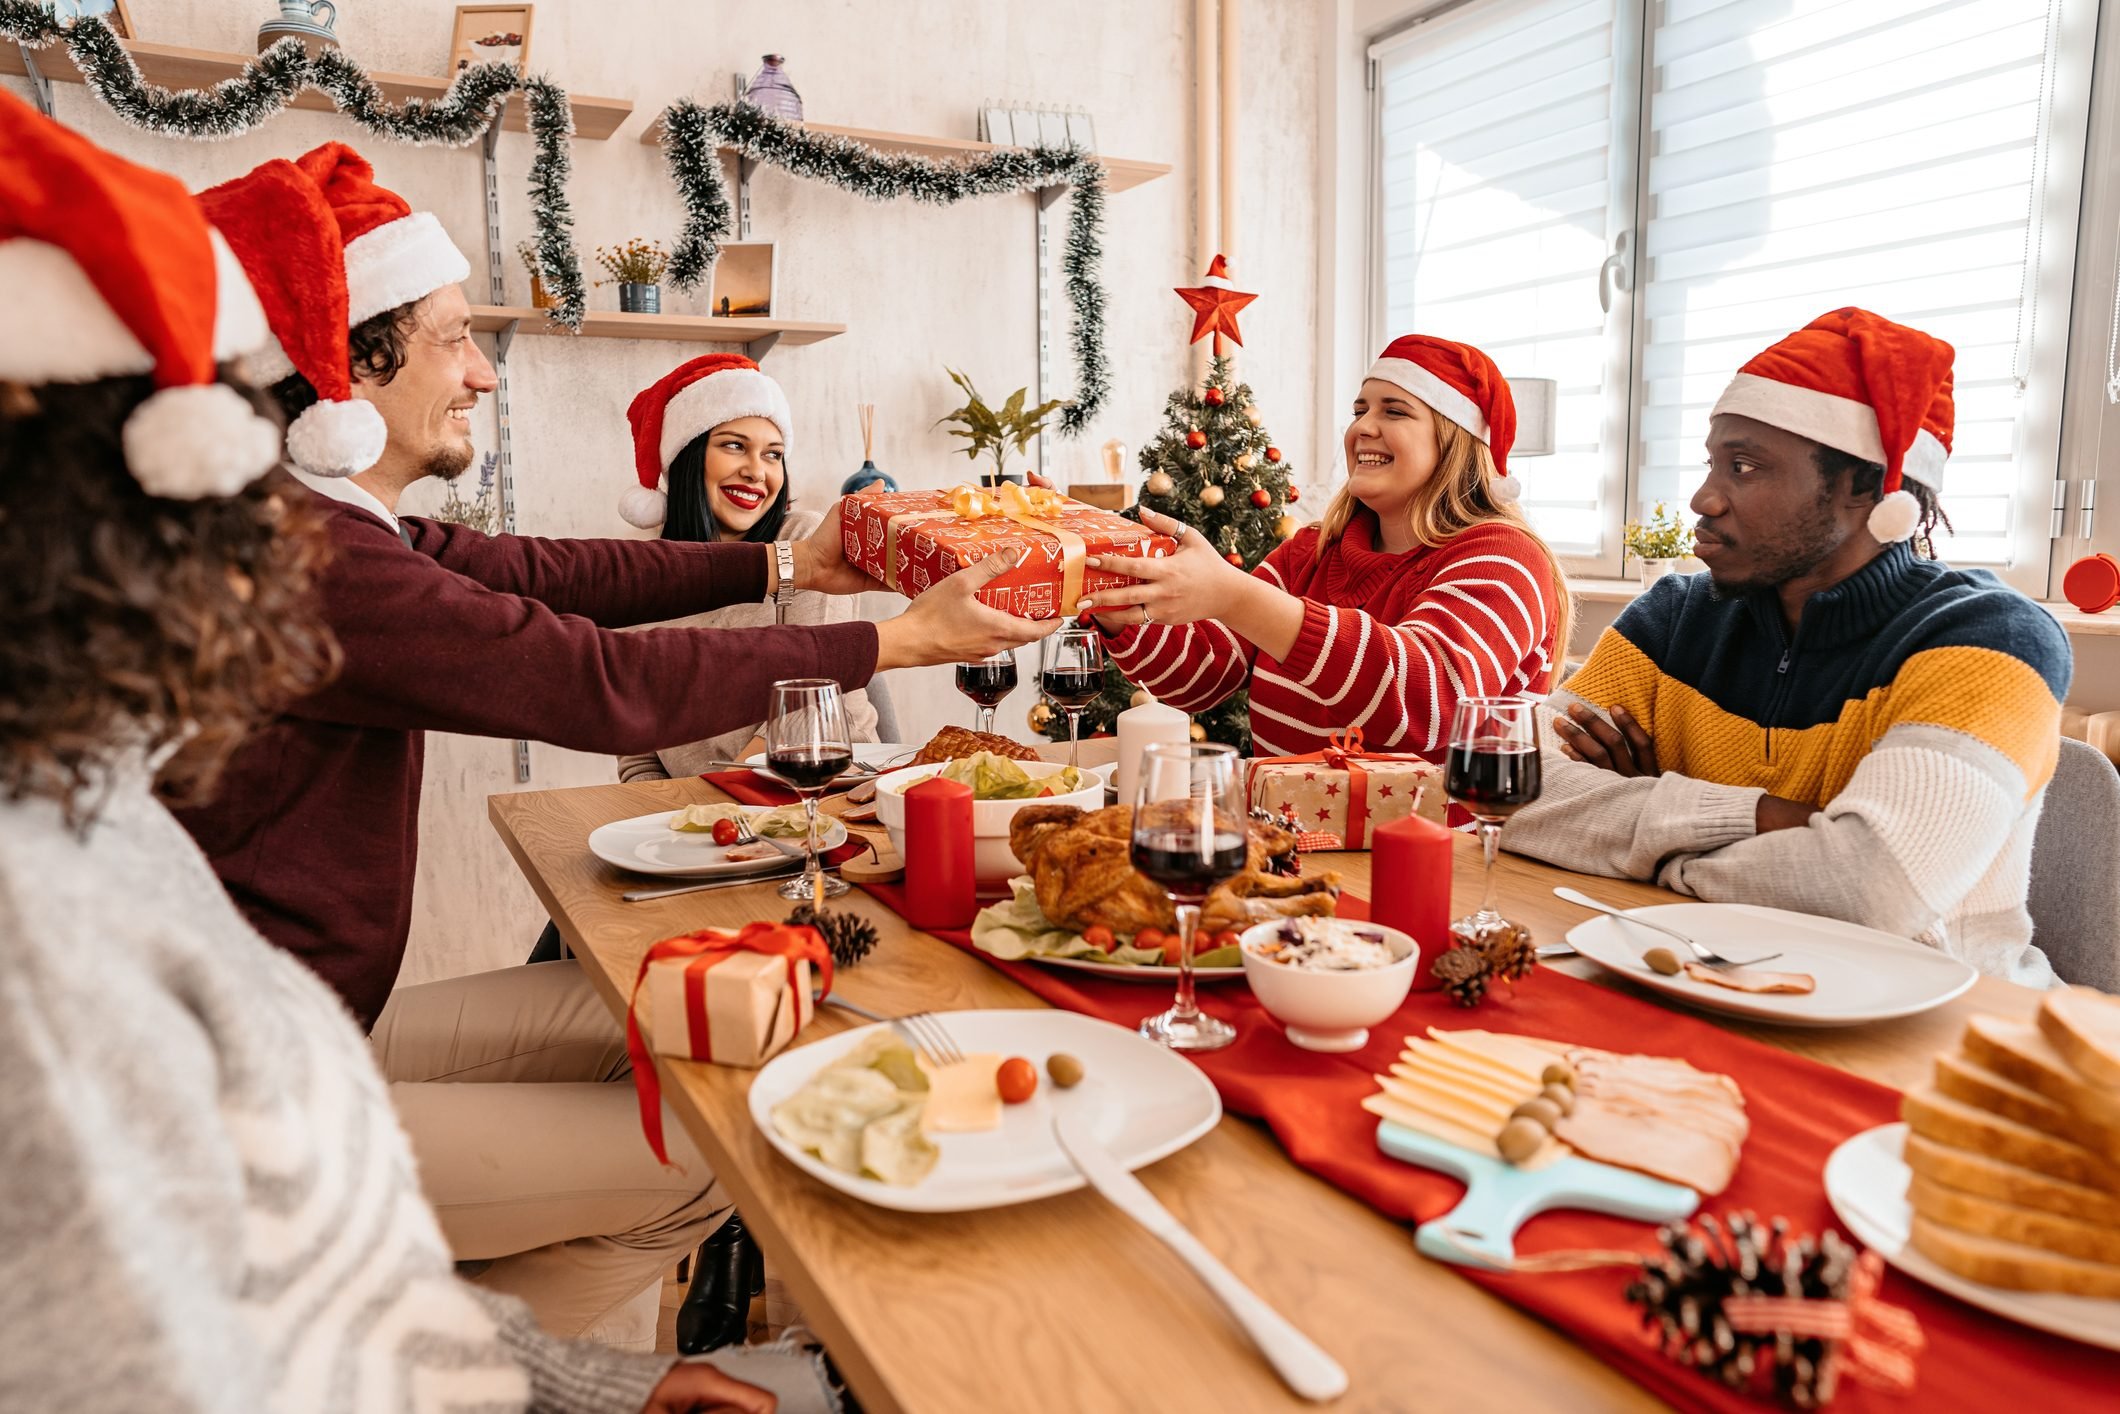 Top 10 Manners for Hosts and Guests on Christmas Day